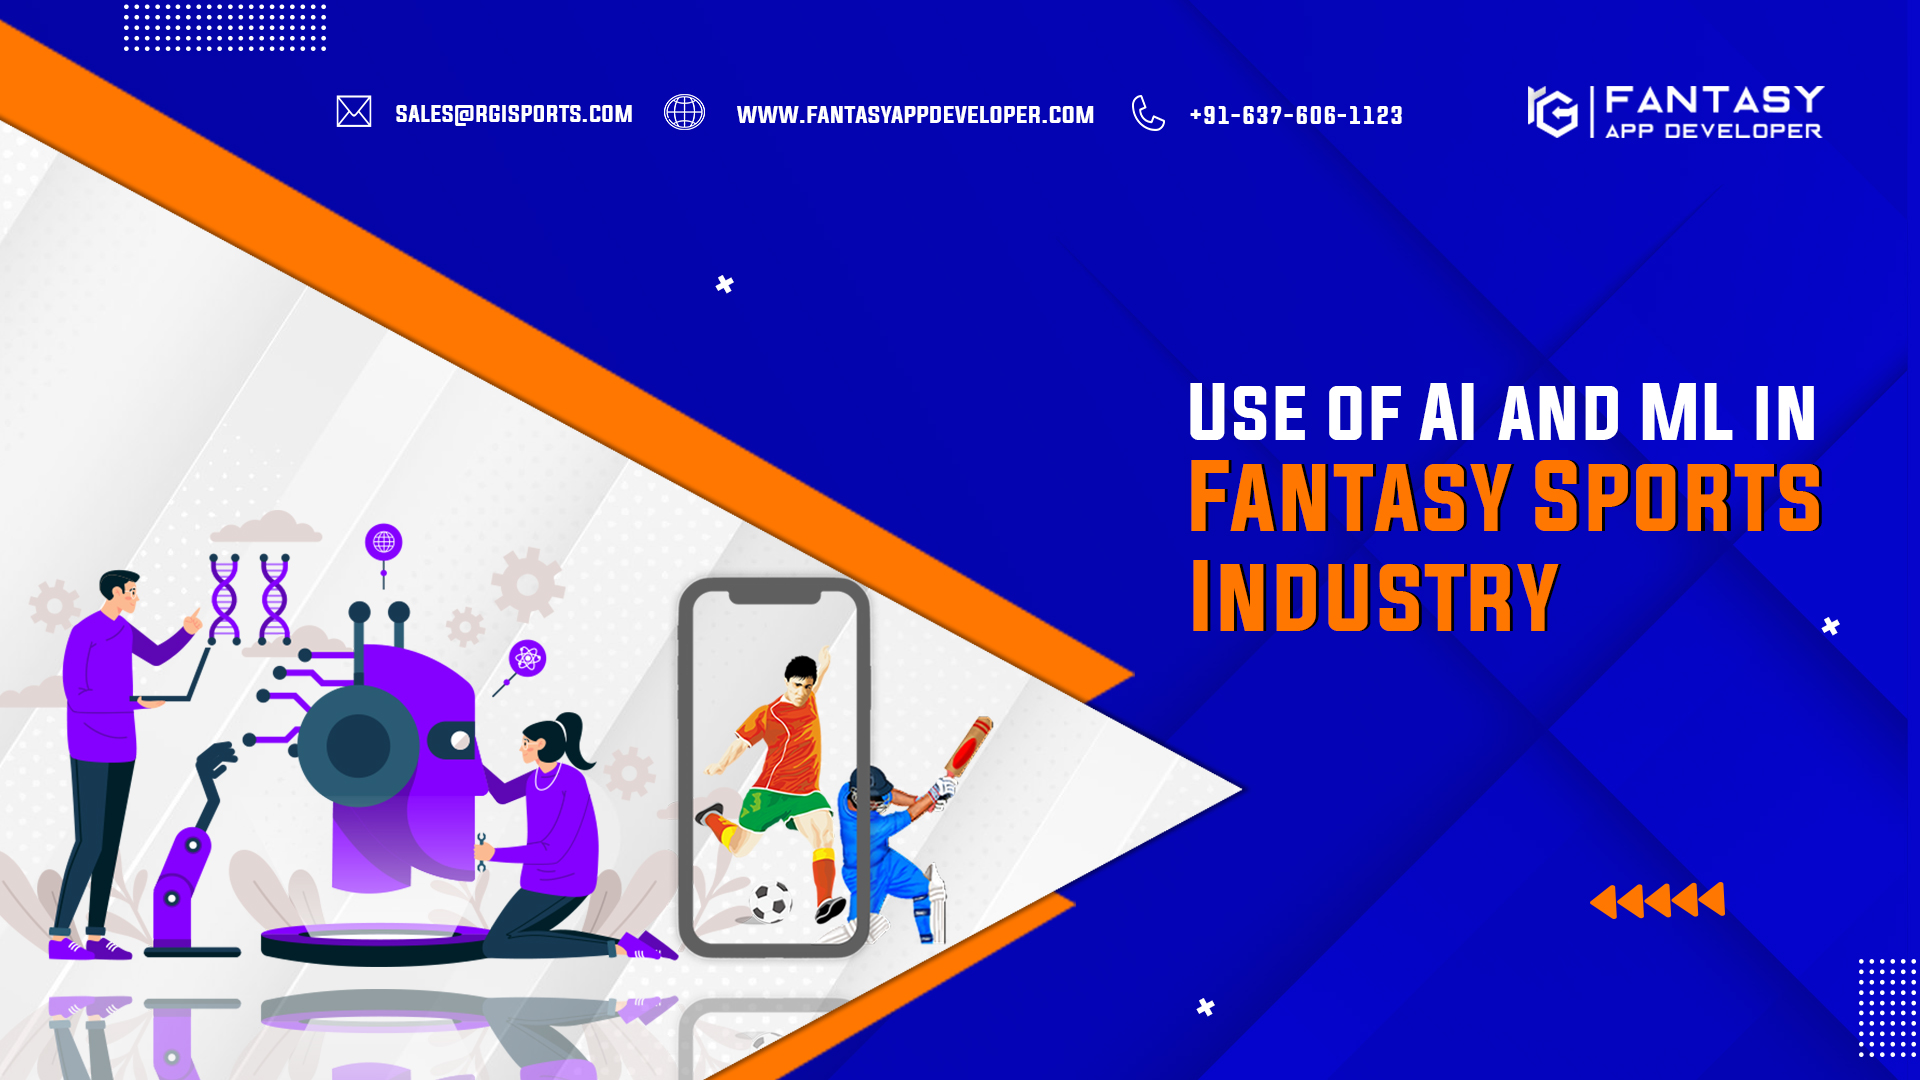 Use of AI and ML in Fantasy Sports Industry